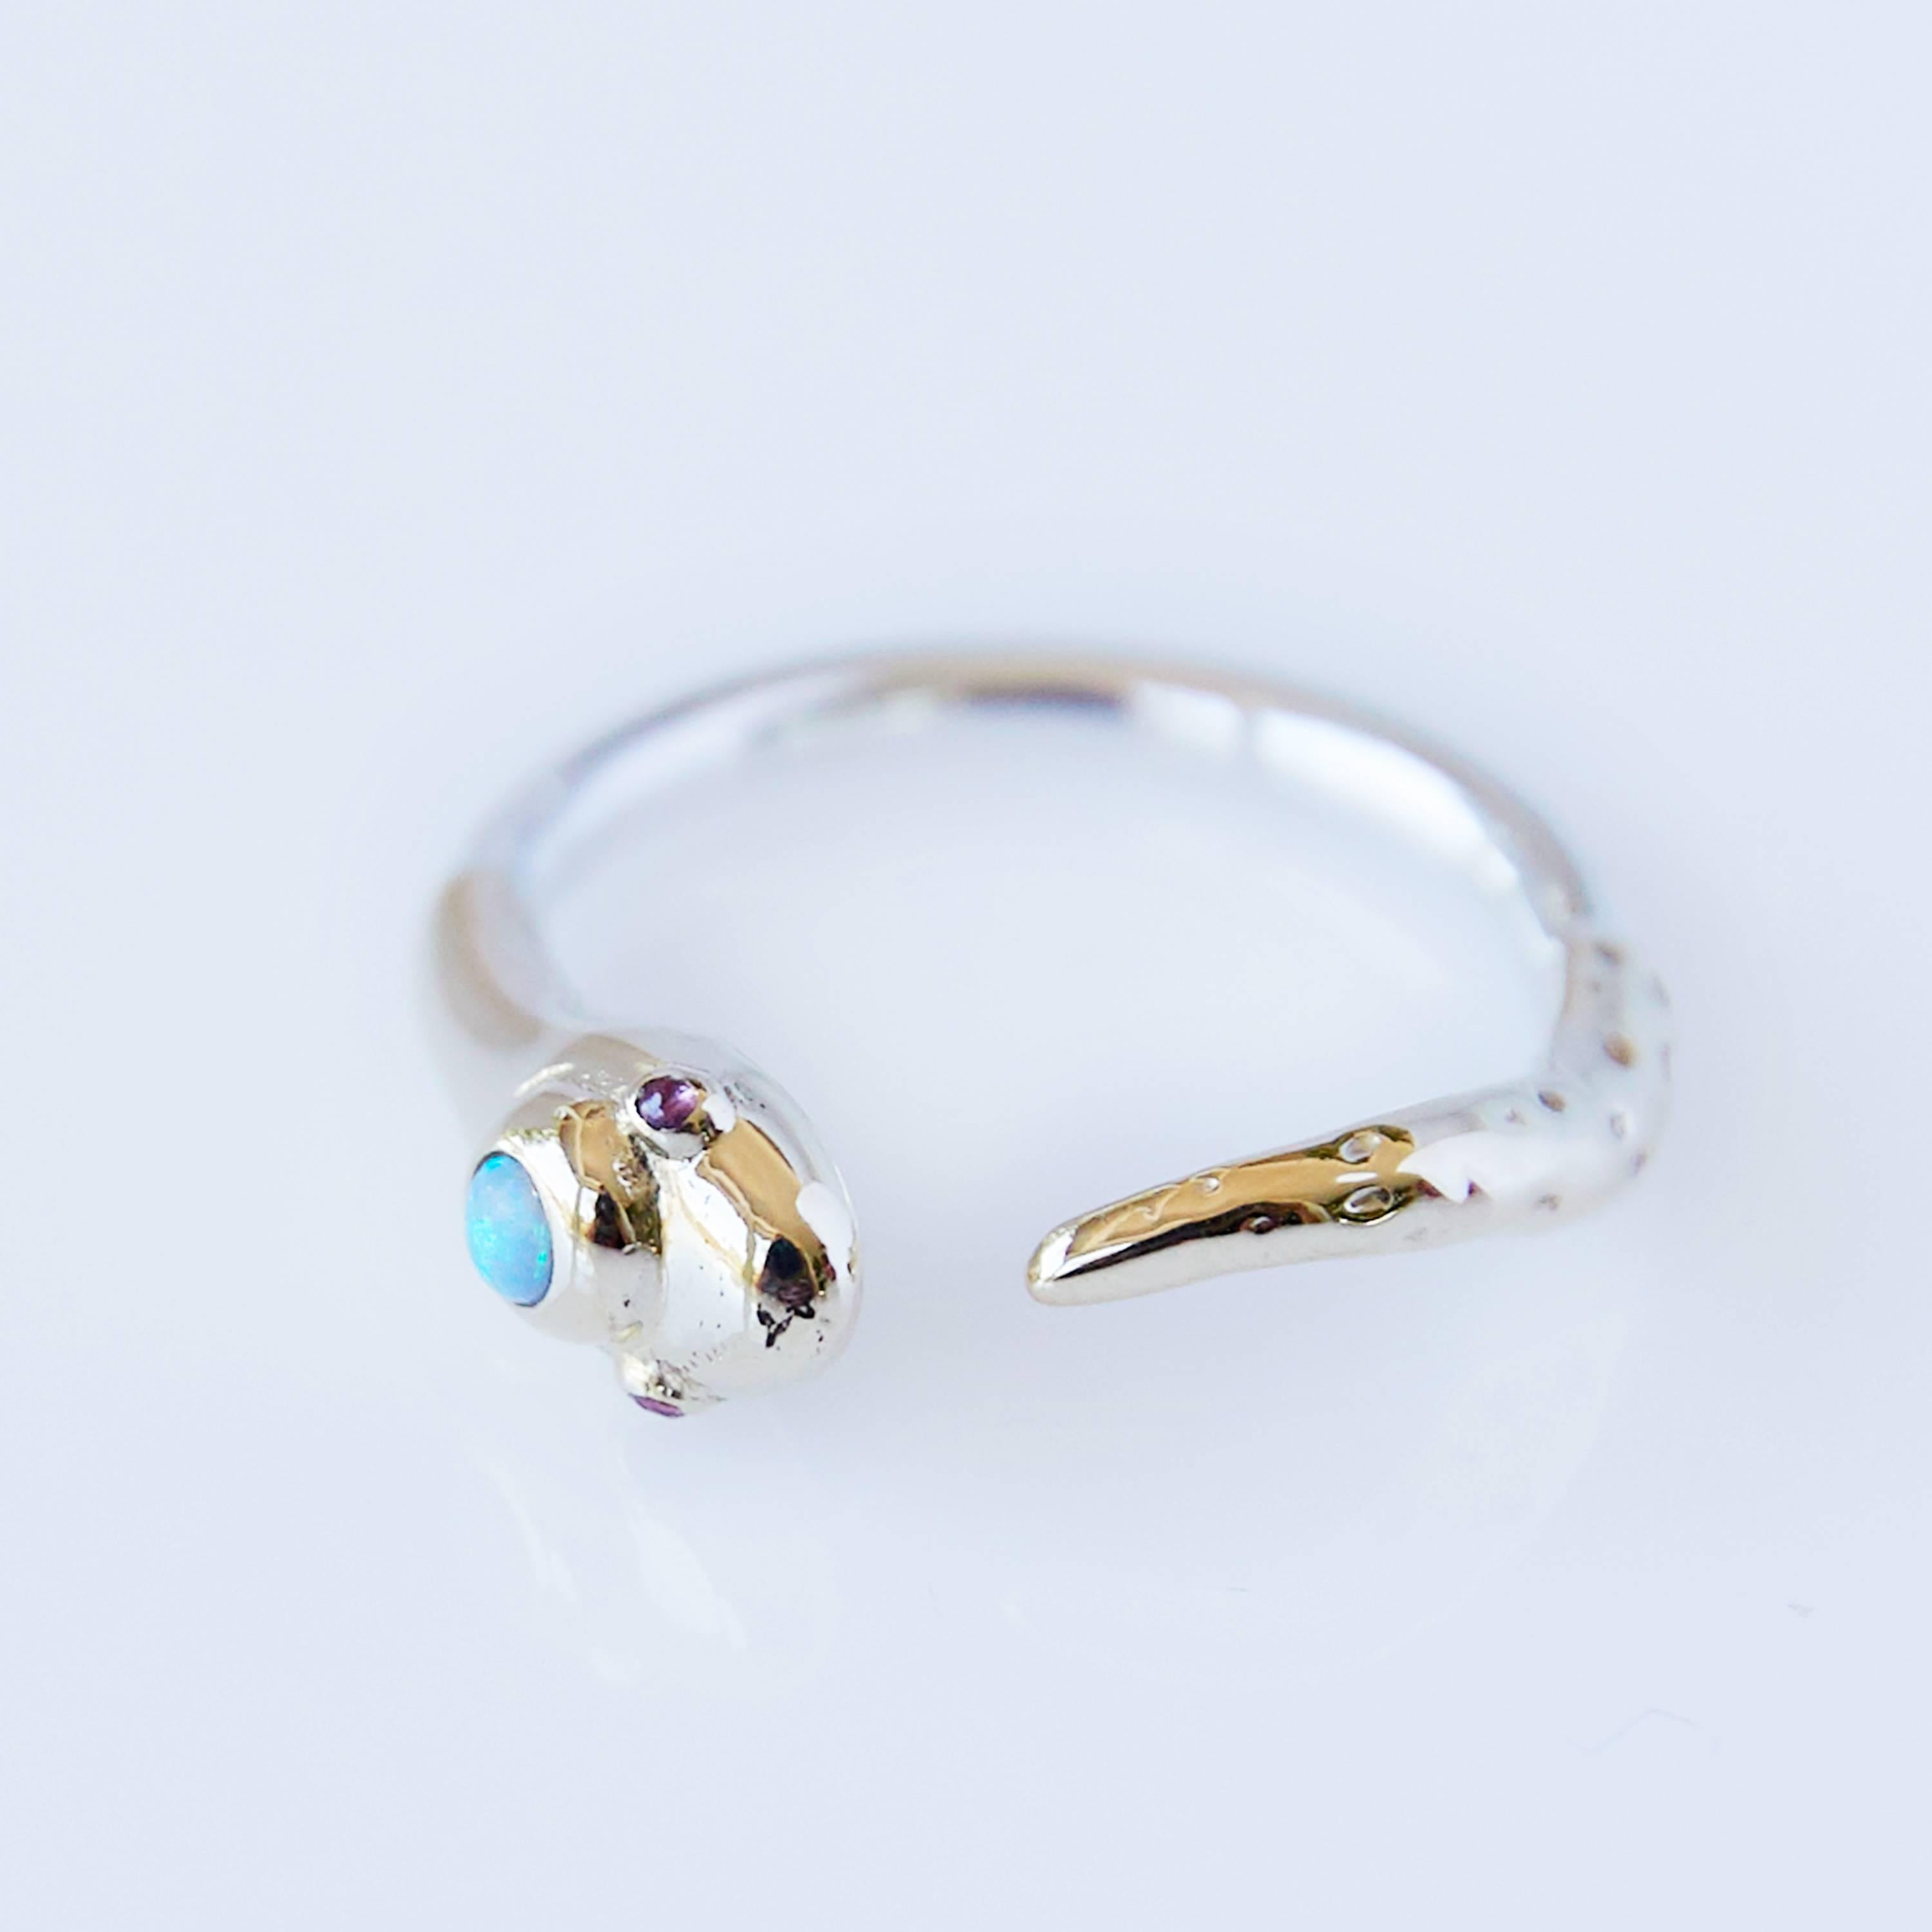 Opal Ruby Snake Ring in Yellow and White Gold
J DAUPHIN 